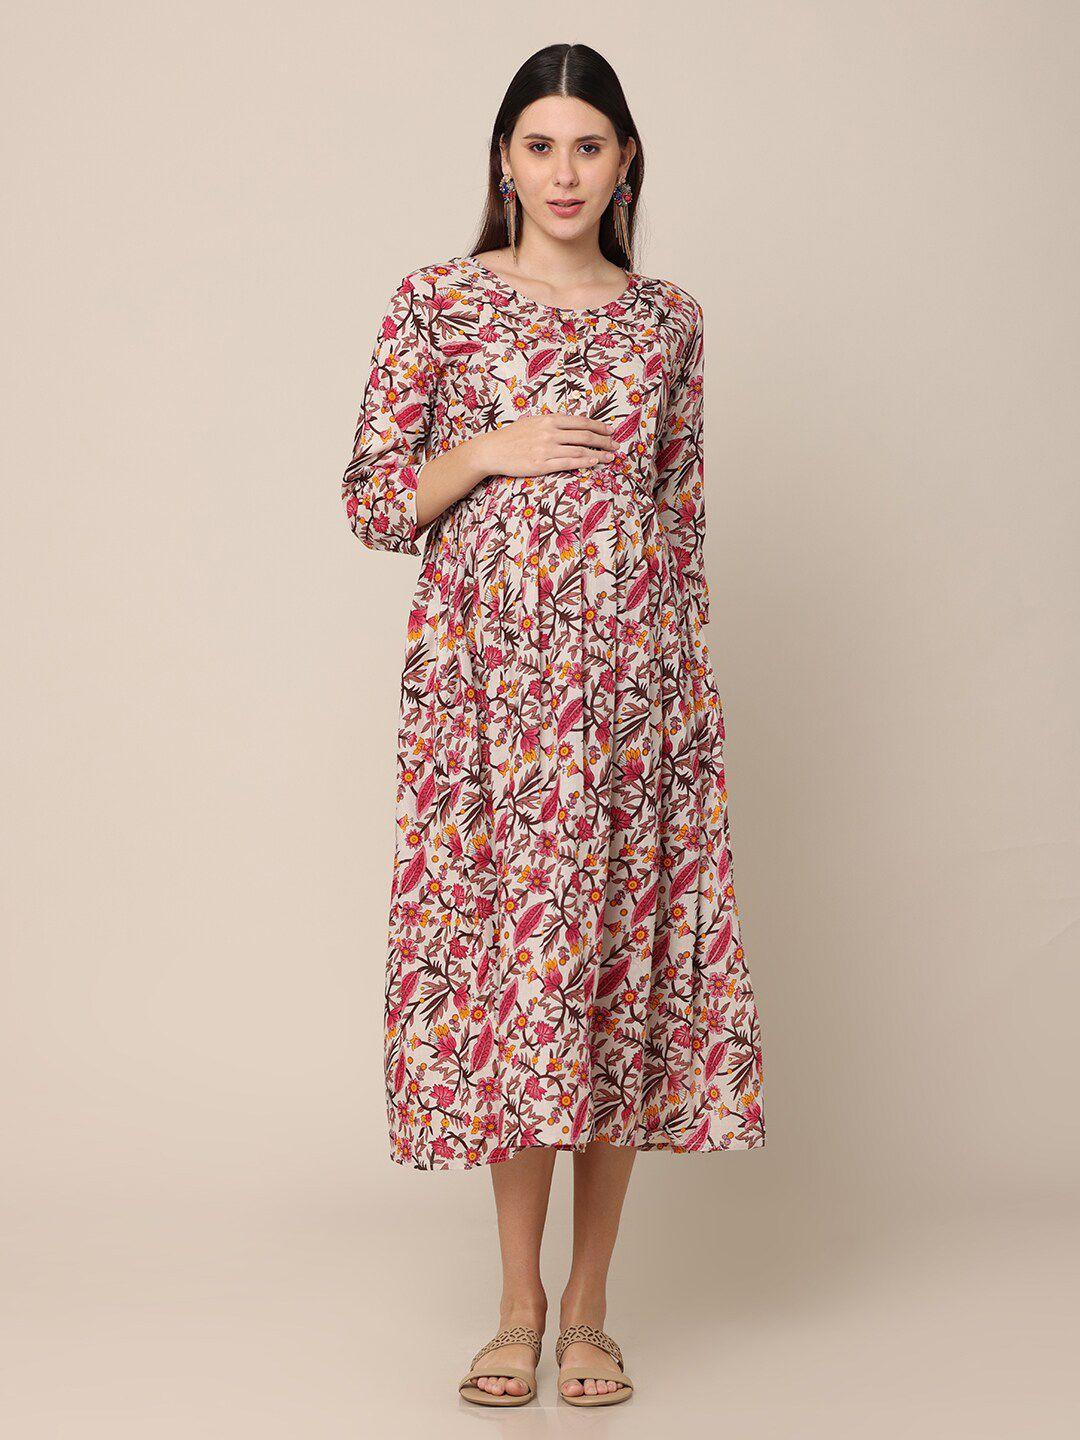 nayra beige & red floral maternity a-line midi dress